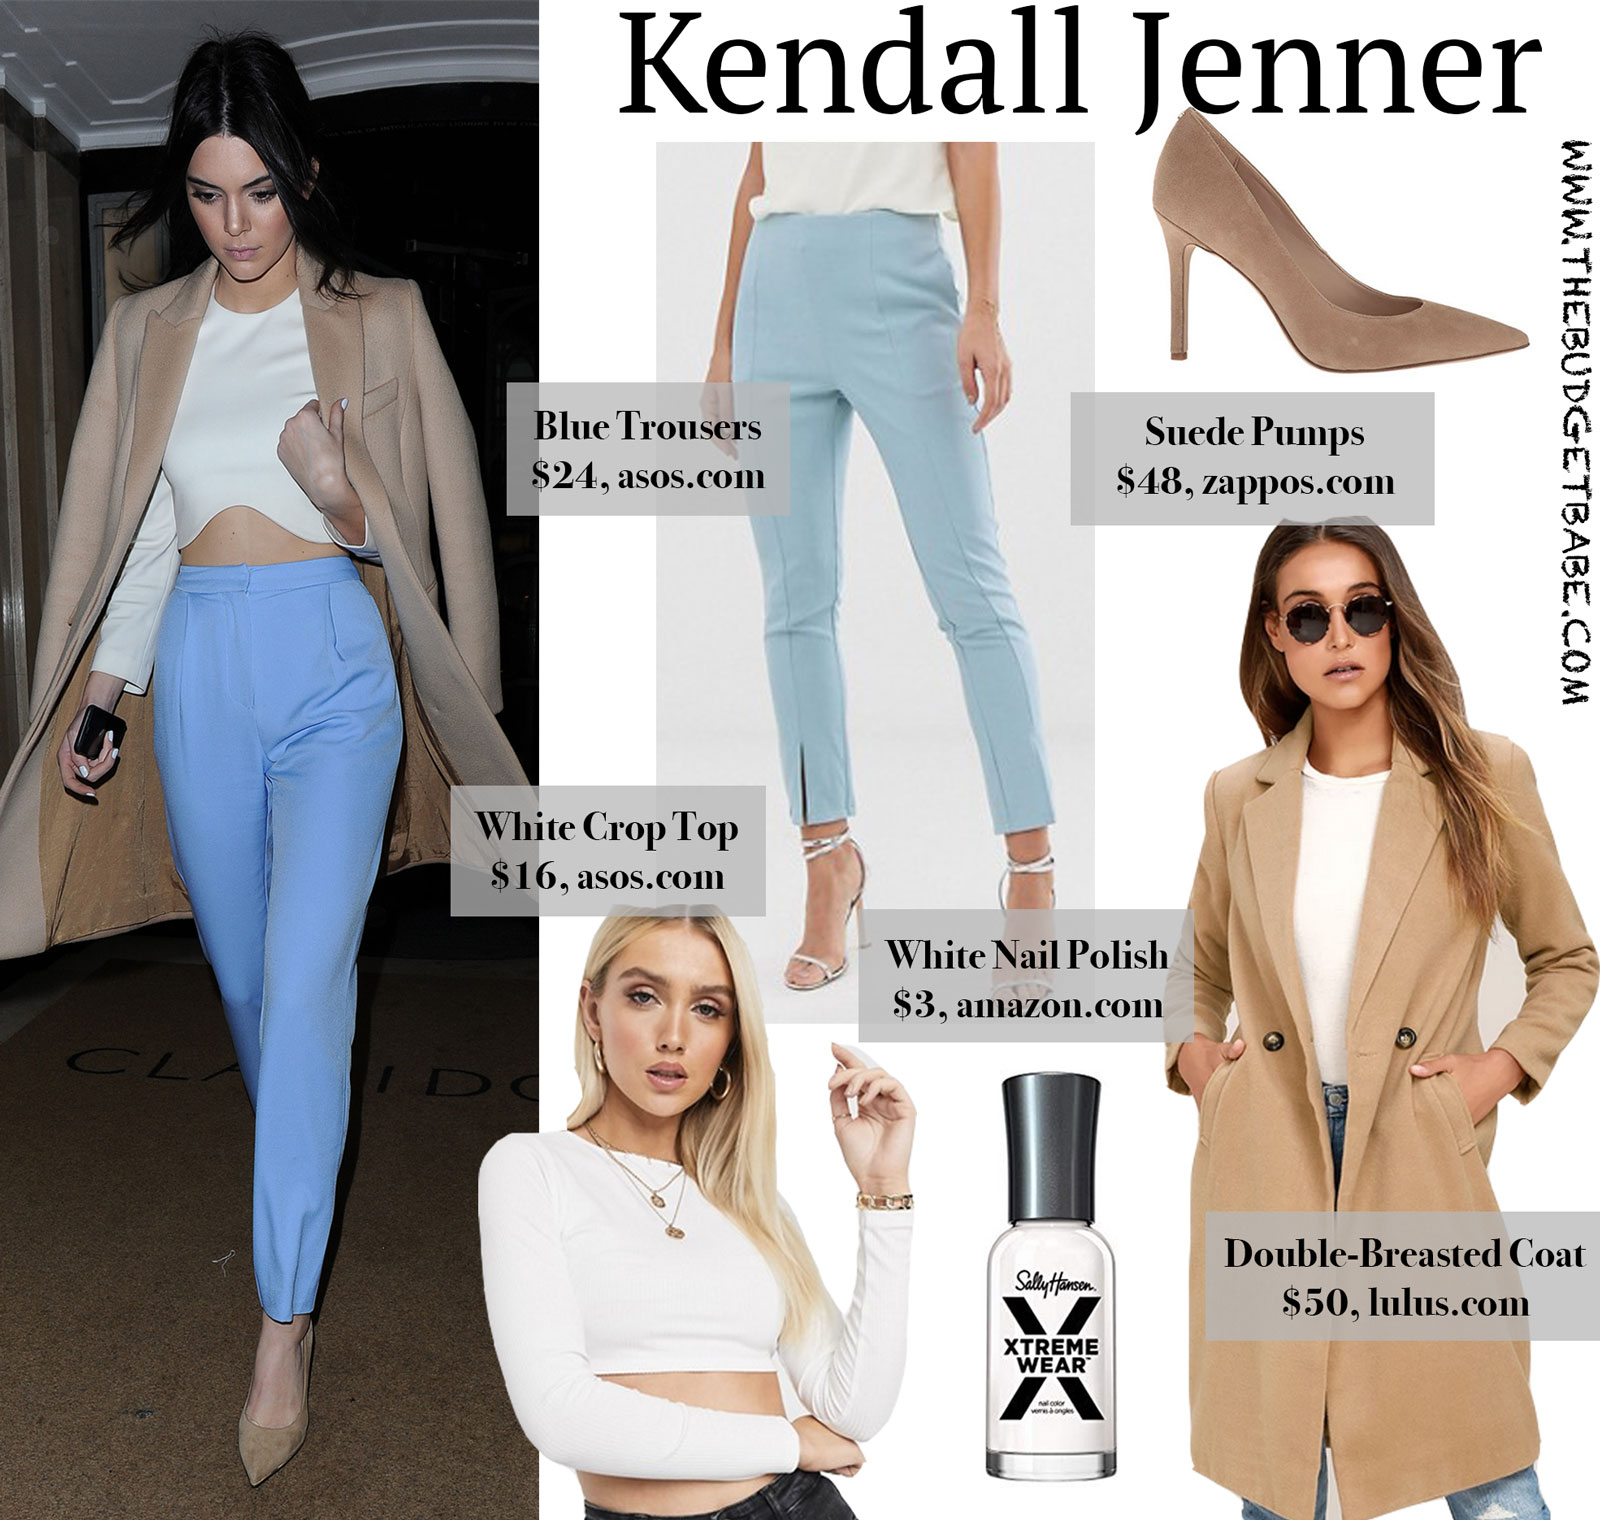 Kendall Jenner Blue Trousers Tan Coat Look for Less